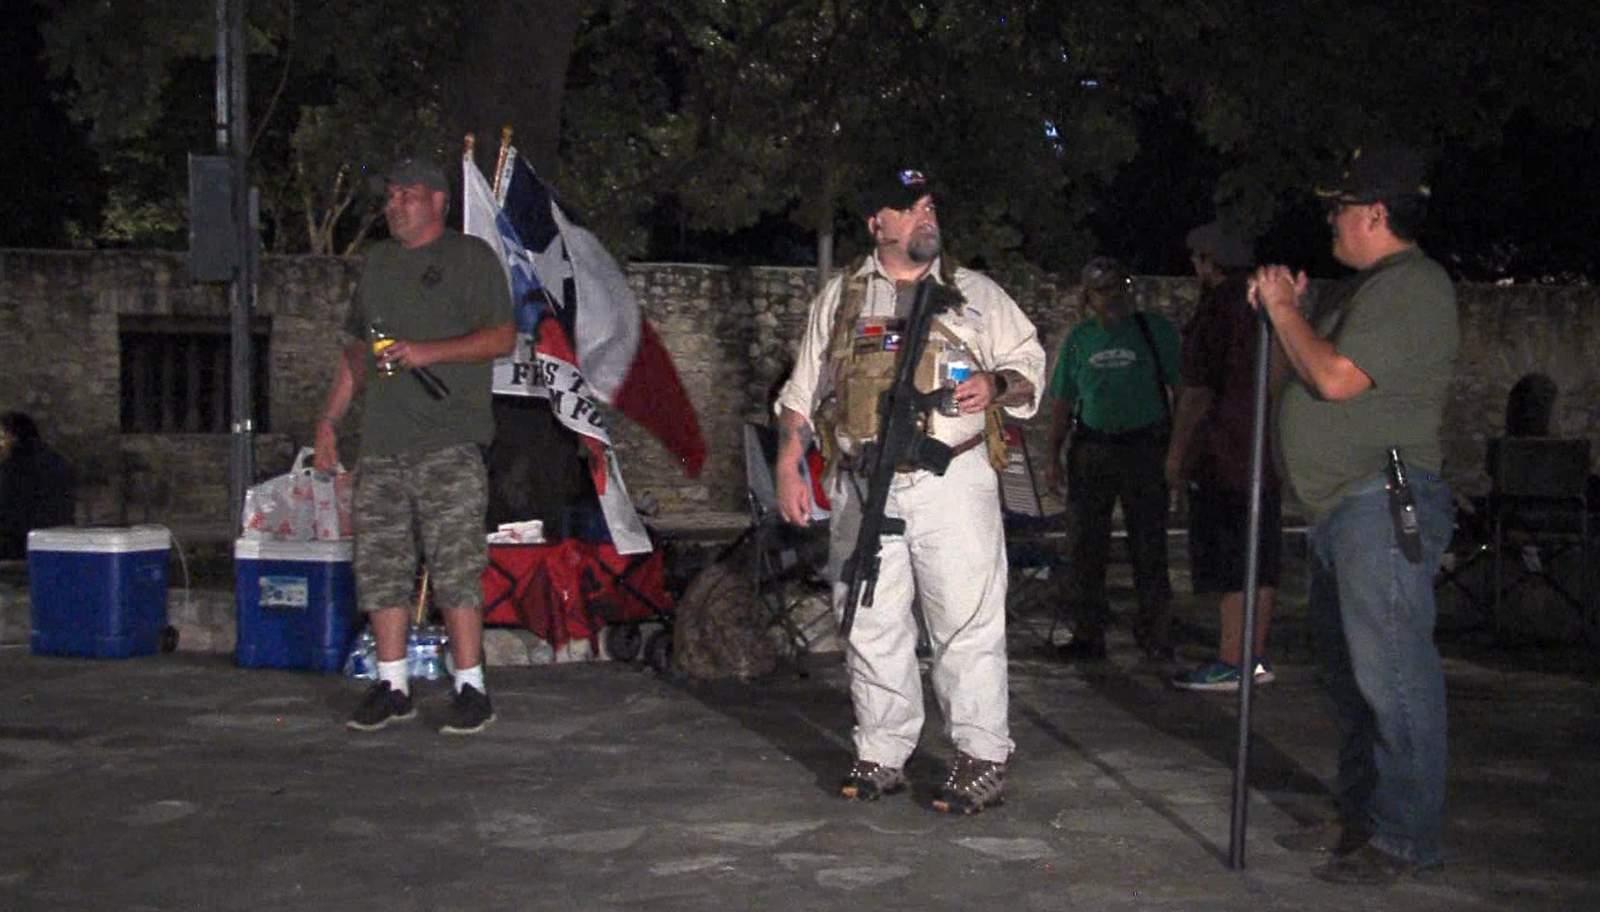 Group of armed men seen standing guard in front of the Alamo Cenotaph overnight, police say